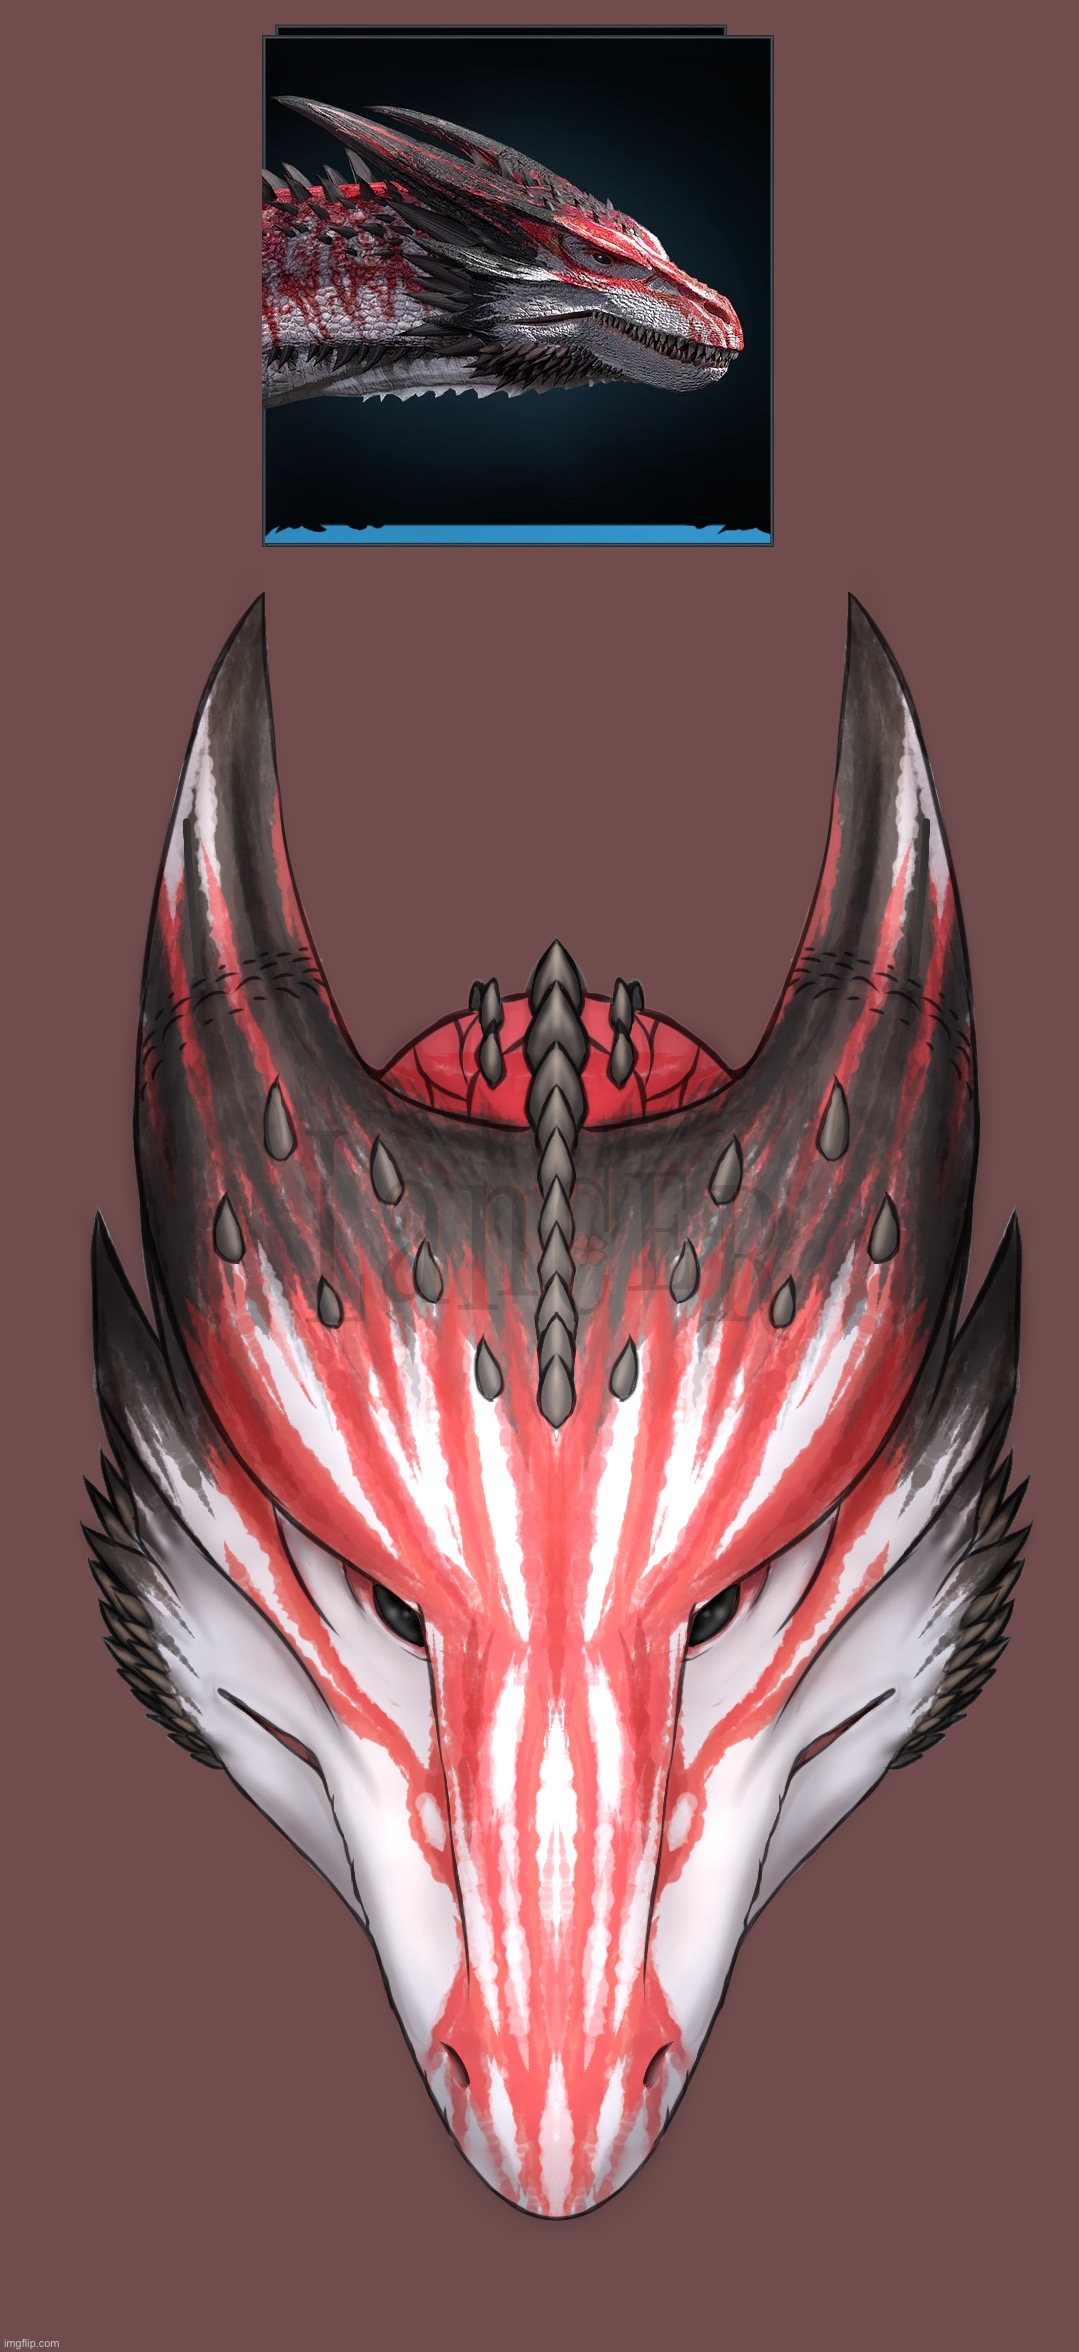 I used Bloodsoaked Gorges to test my shading Rate it 1-10 | image tagged in bloodchaser,century,dragon,century age of ashes,digital art | made w/ Imgflip meme maker